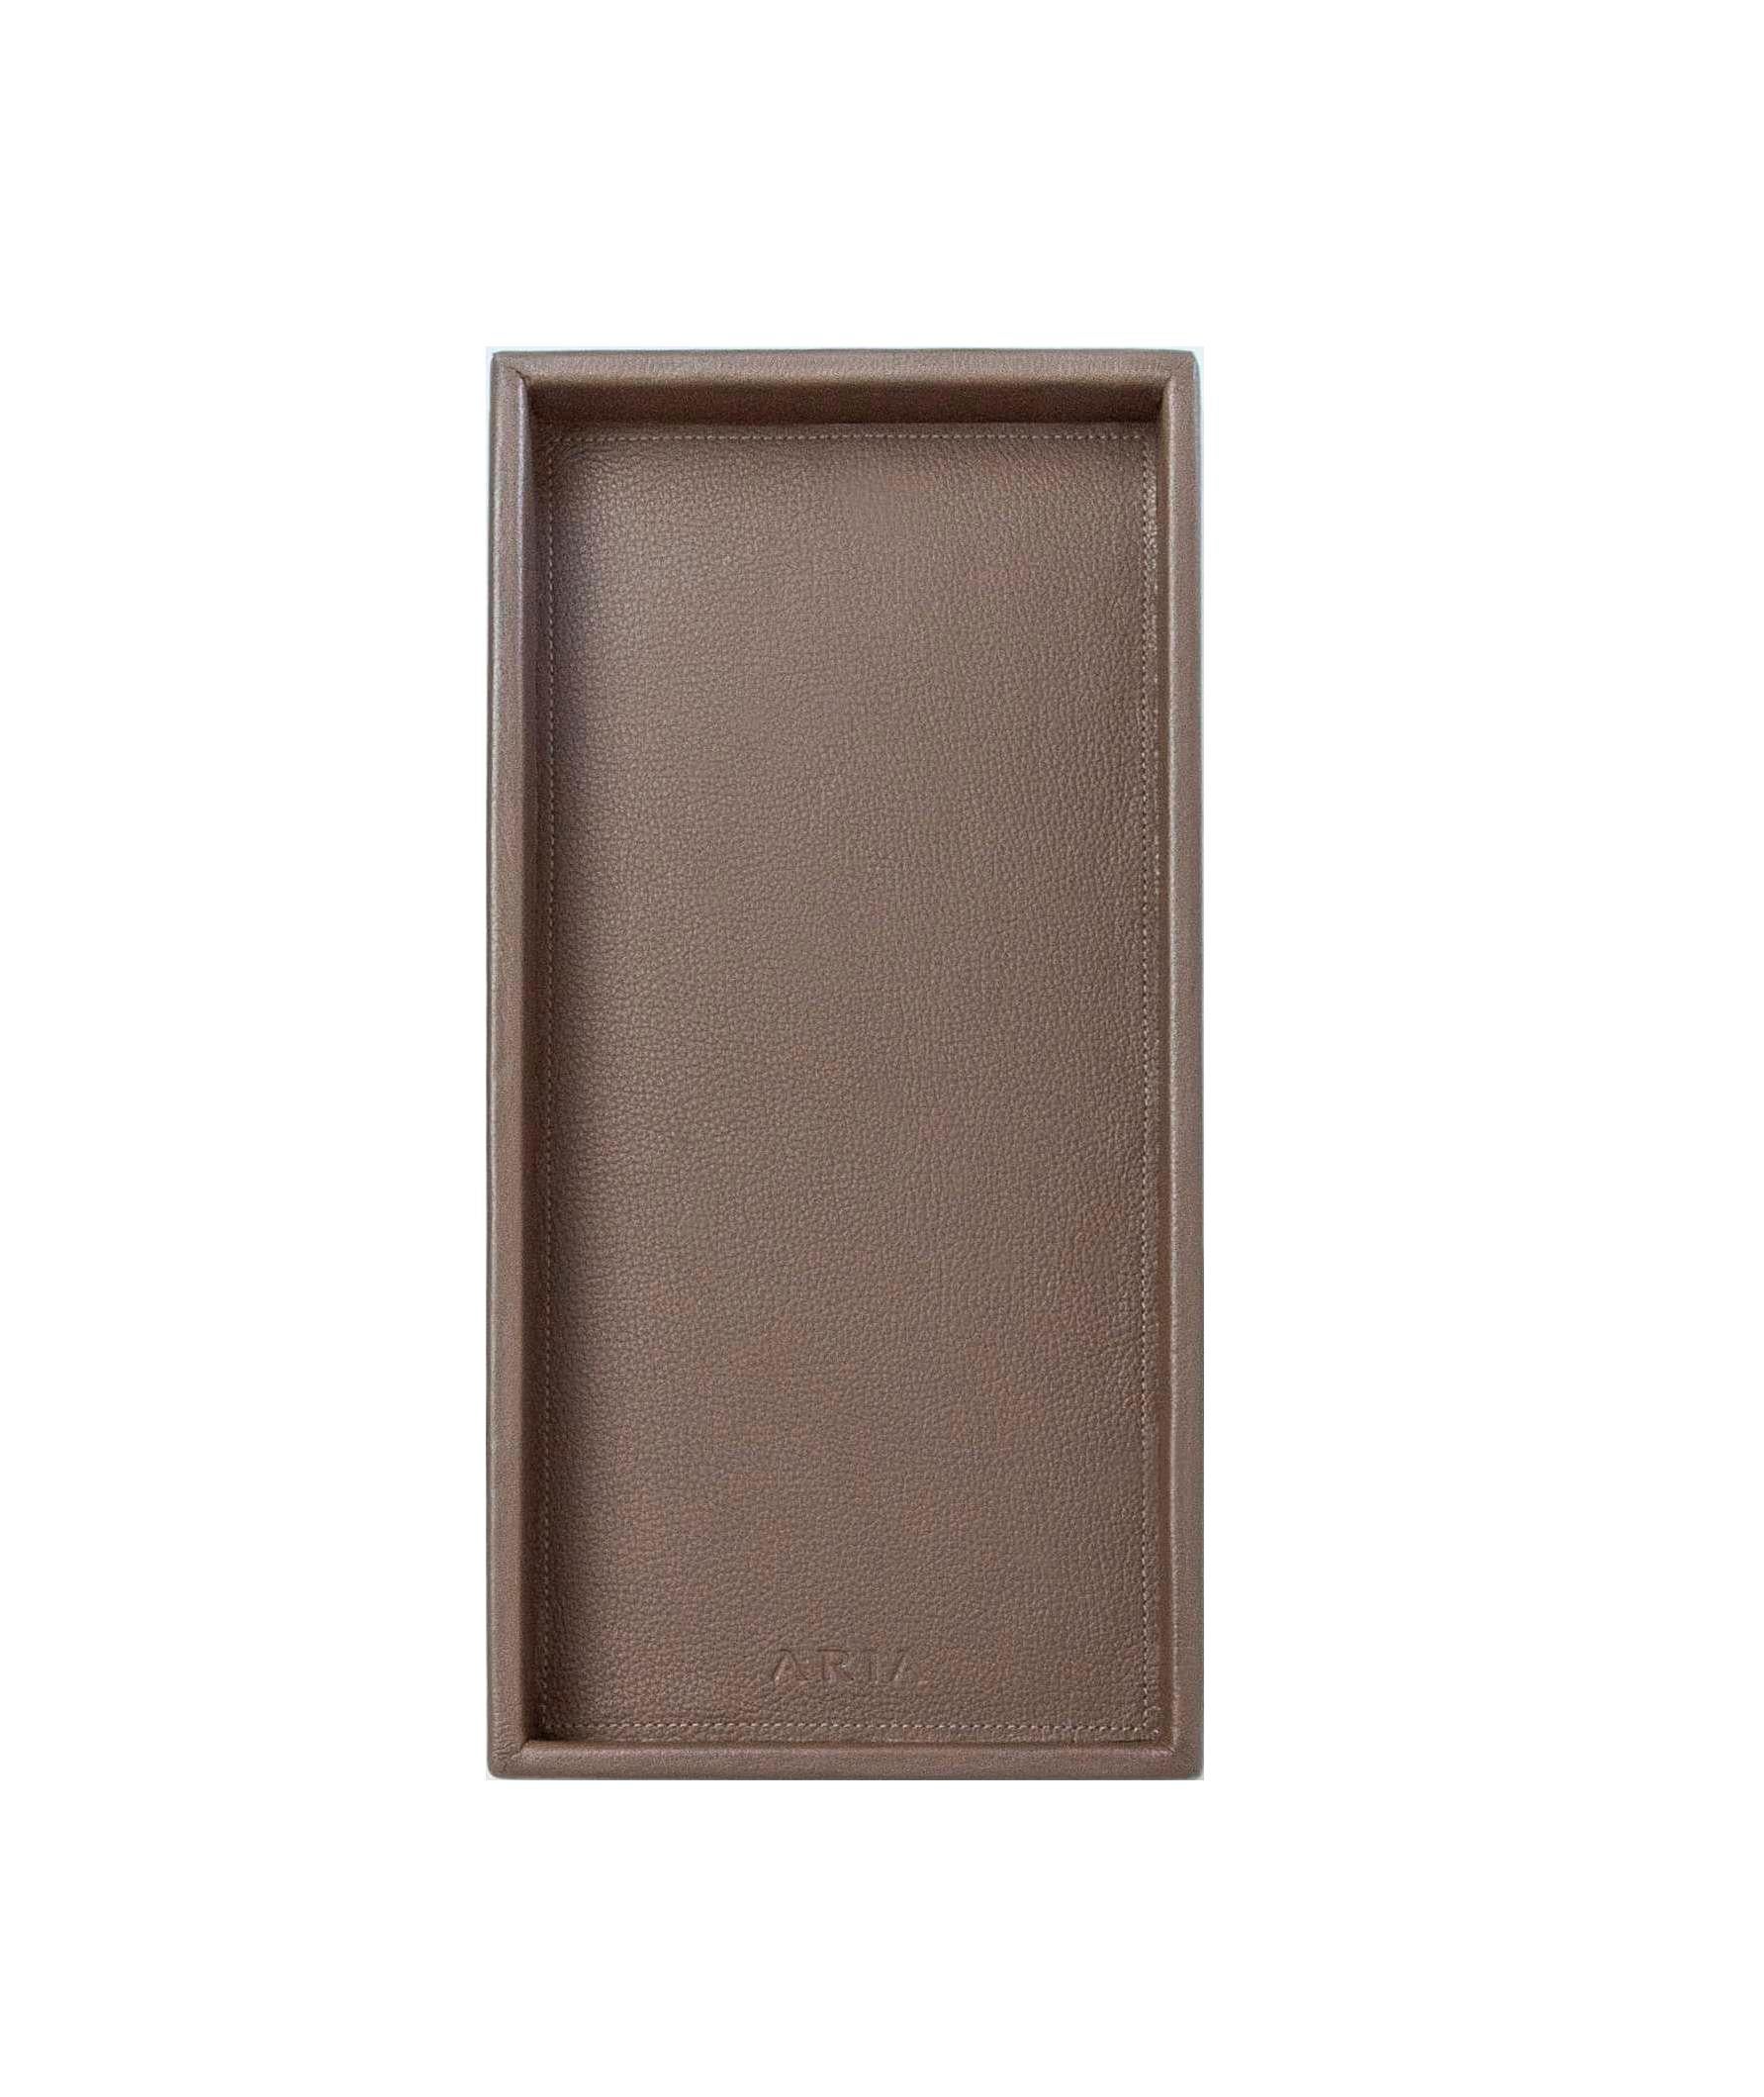 Modern Leather Tray, Medium A Rectangular Tray - Handmade - Color: Clay For Sale